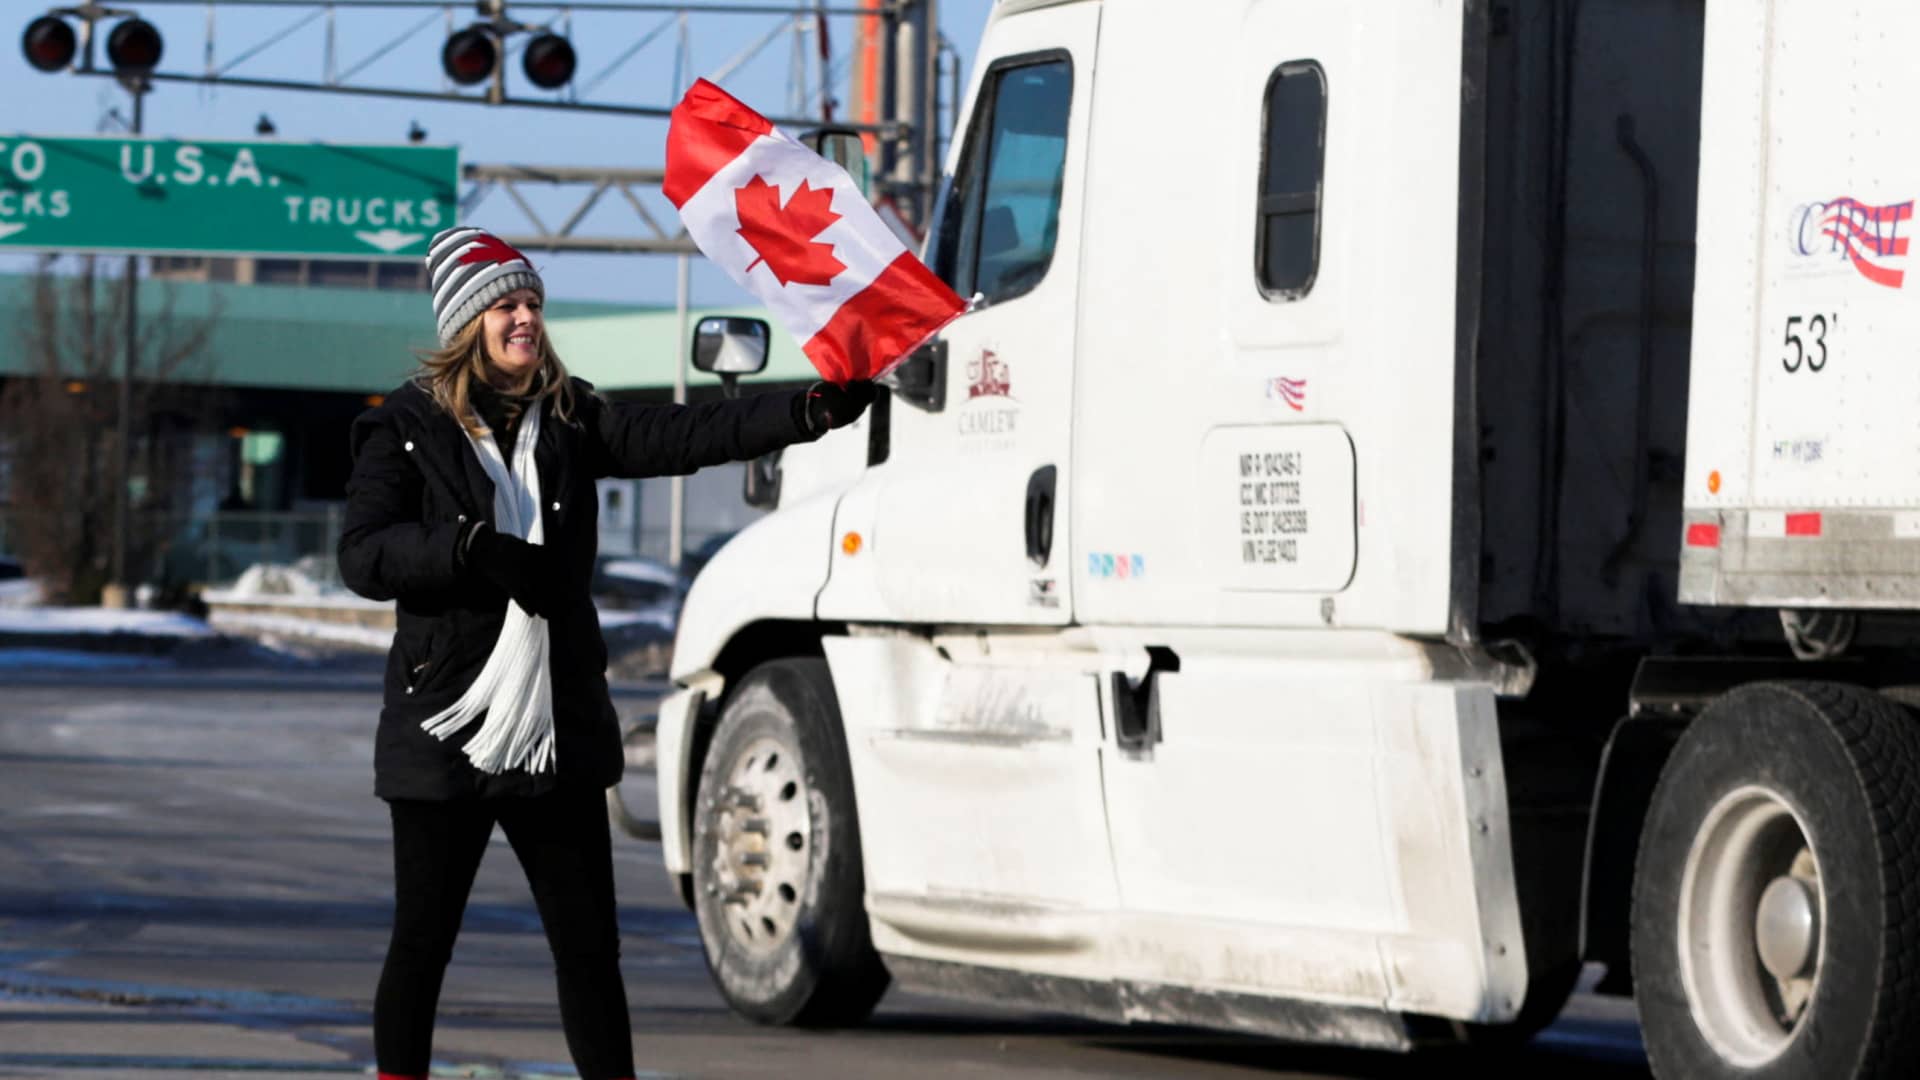 A woman attends a protest against the coronavirus disease (COVID-19) vaccine mandates, as vehicles block the route leading from the Ambassador Bridge linking Detroit and Windsor, in Windsor, Ontario, Canada February 8, 2022.